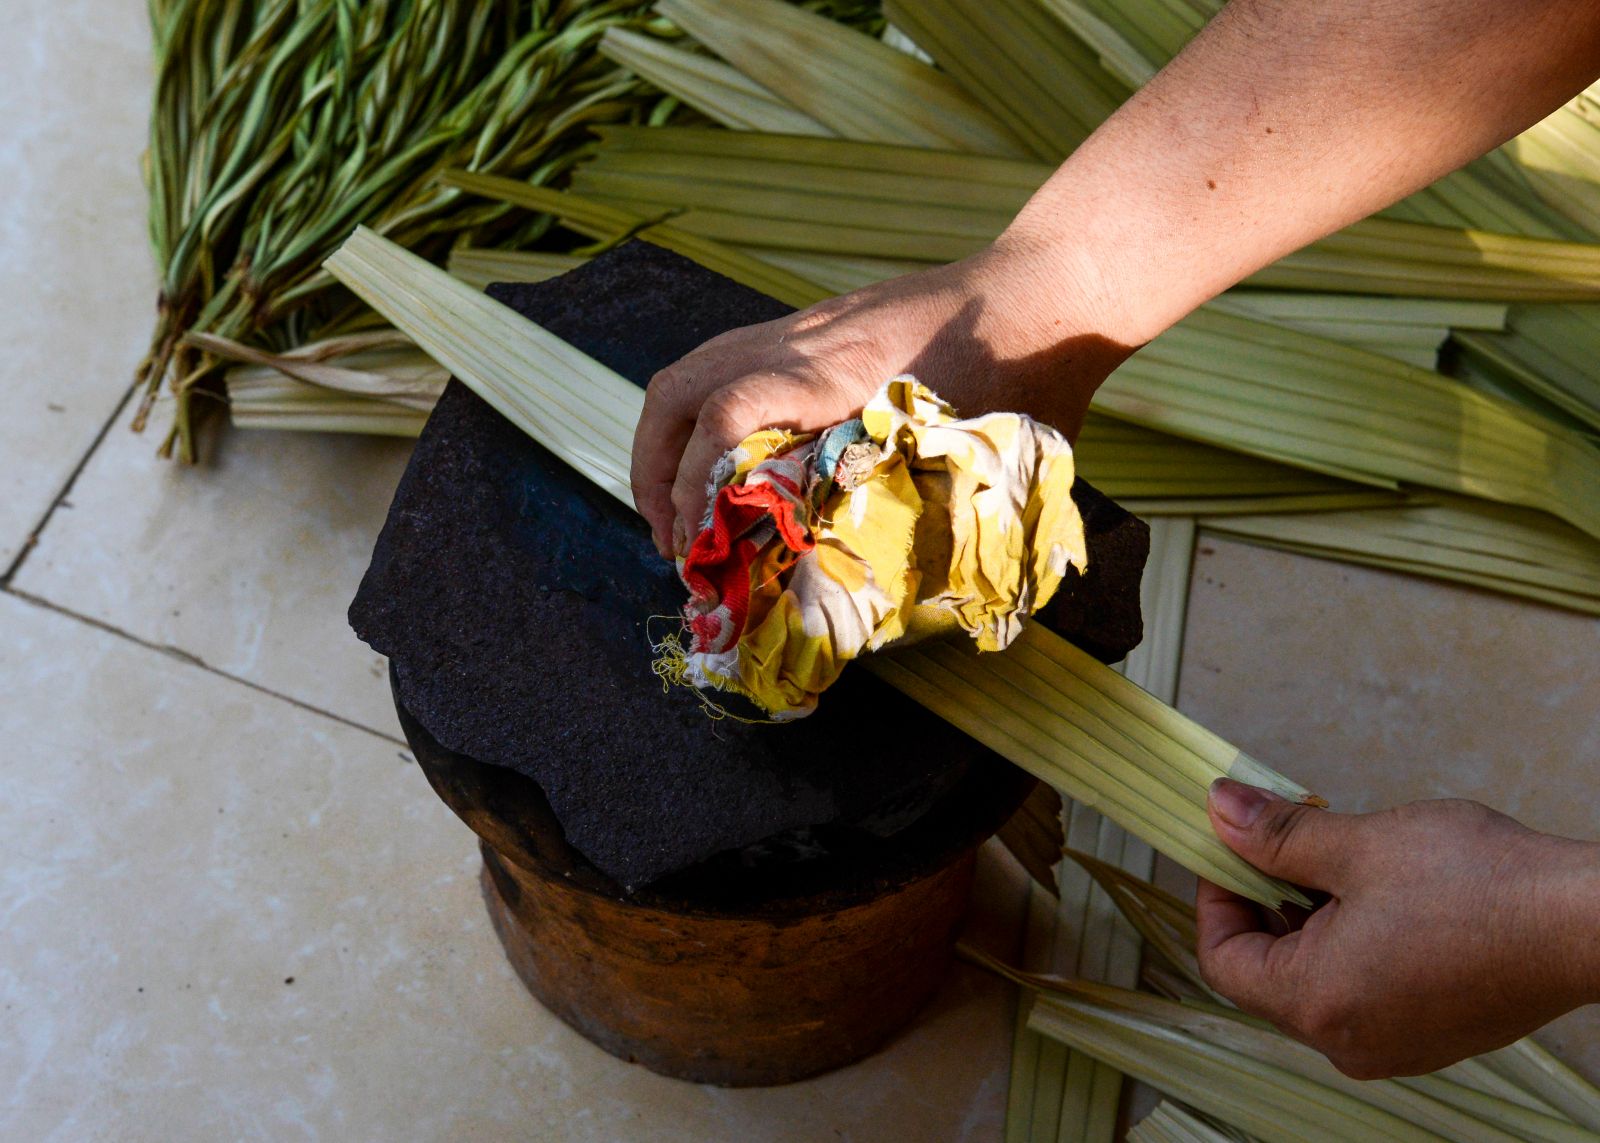 The palm strips are ironed under the temperature of around 70o to 80oC by the hat makers